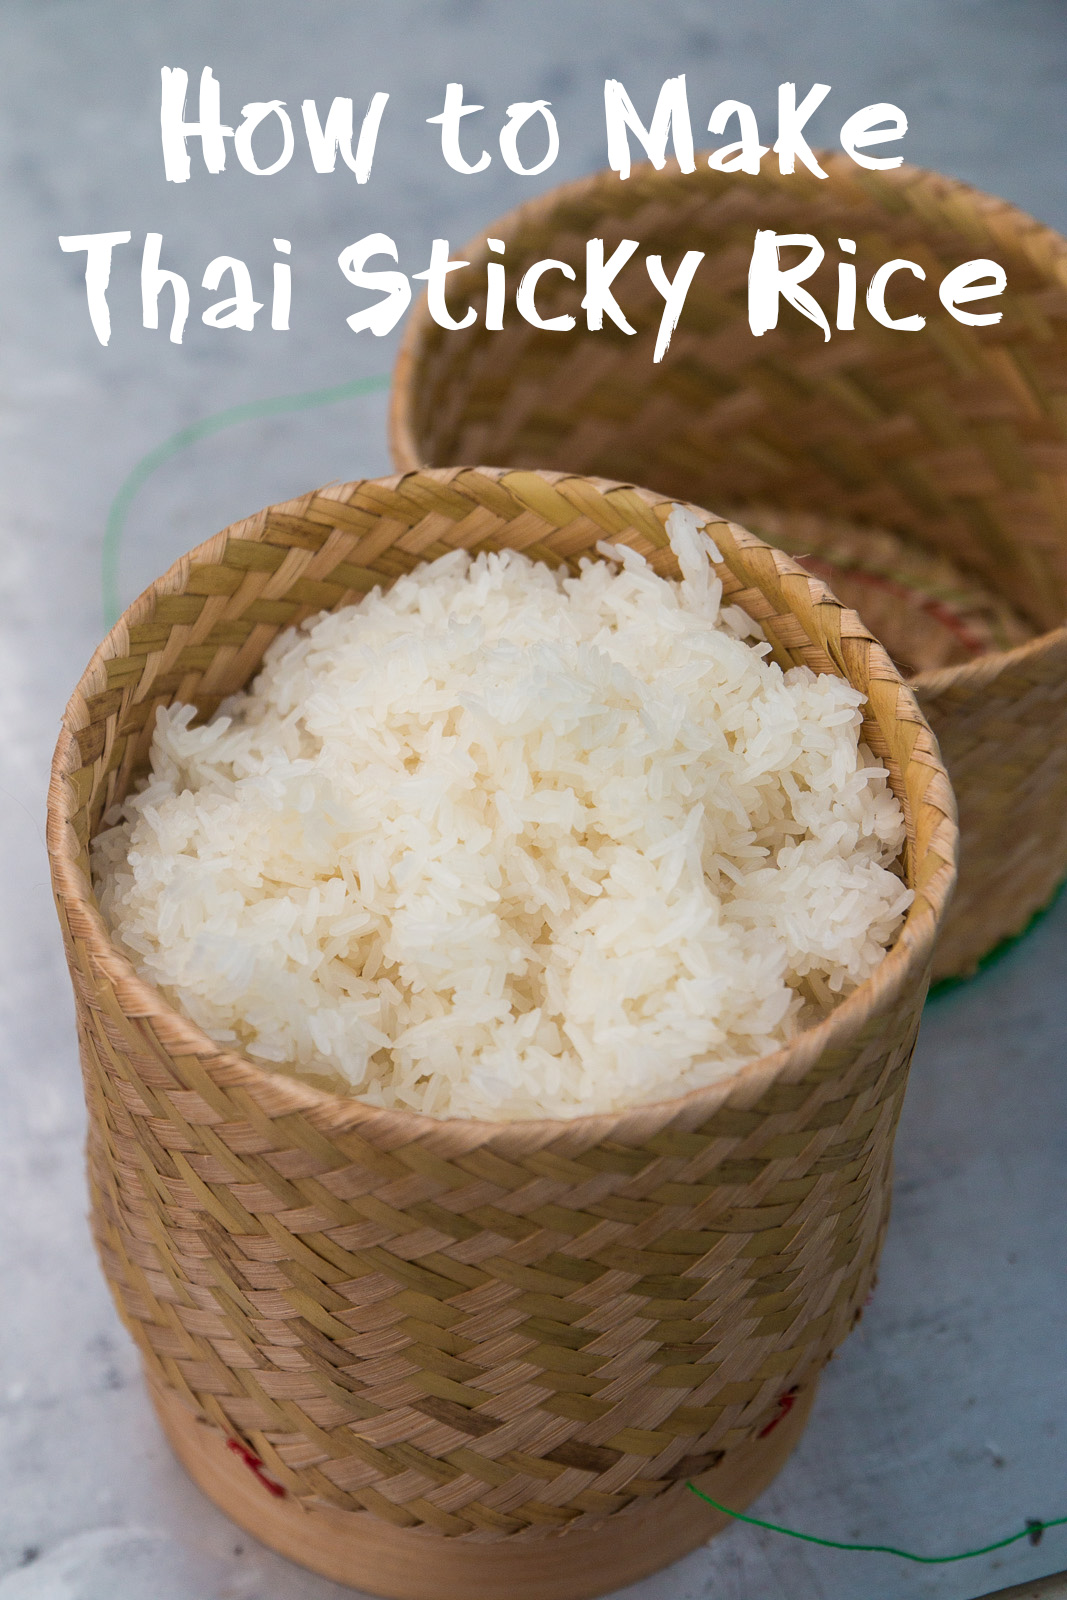 How to Make Thai Sticky Rice (and How To Eat It)